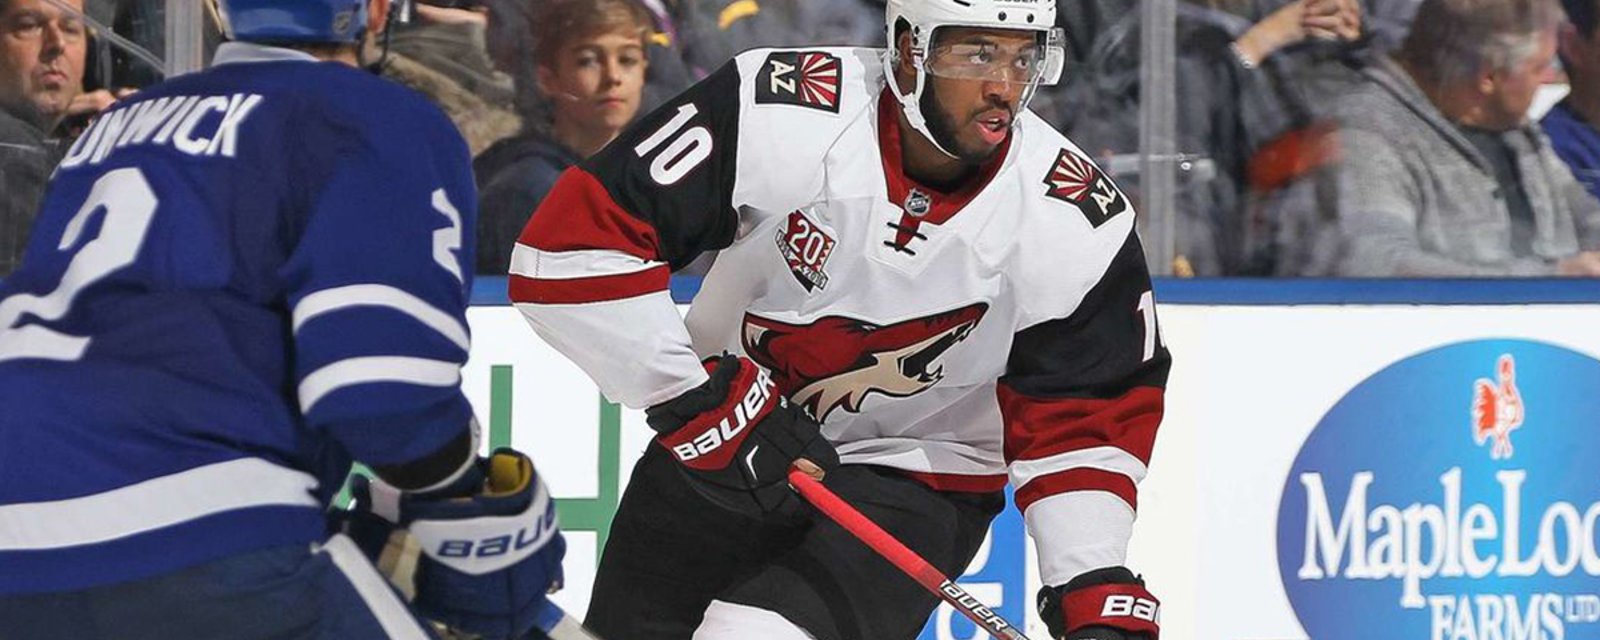 Your Call: Should the Leafs trade for Duclair?